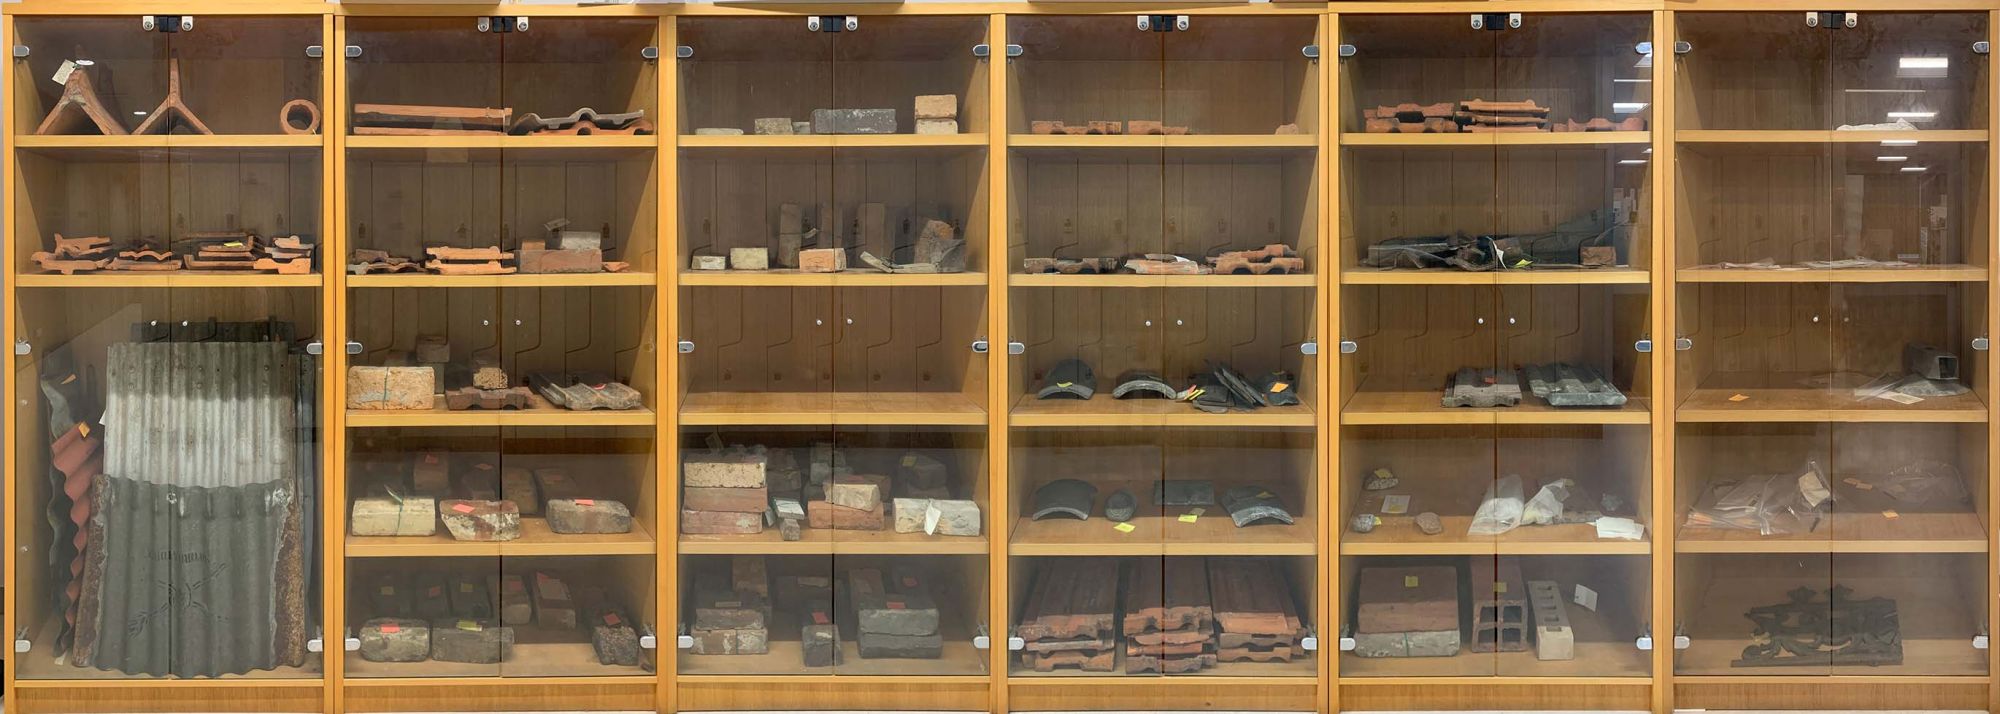 Collection in wooden cabinets at the Melbourne School of Design, Glyn Davis Building.